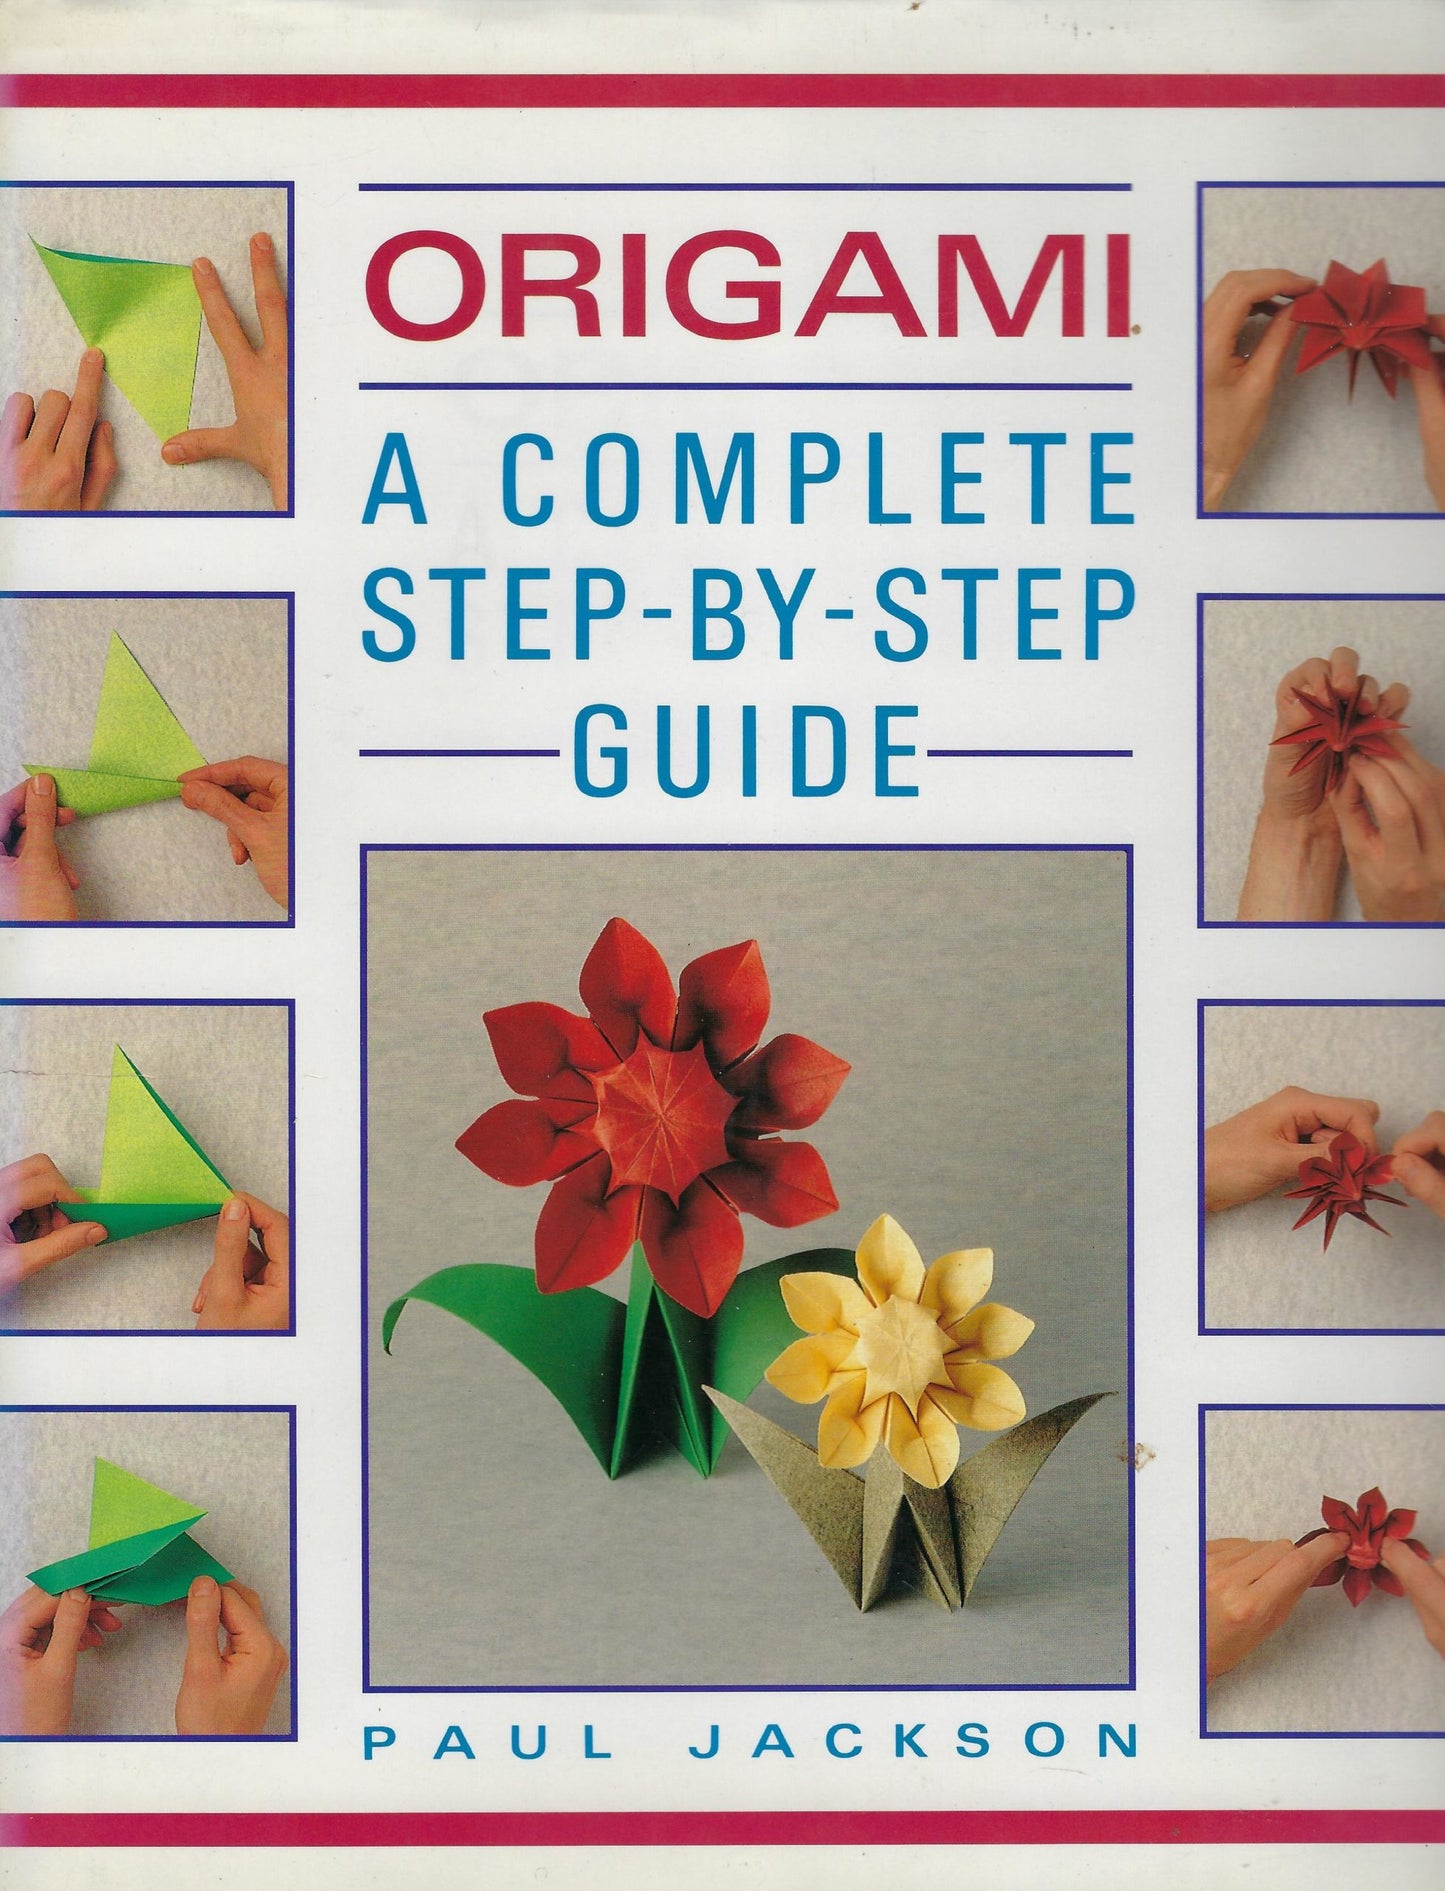 Origami a complete step-by-step guide